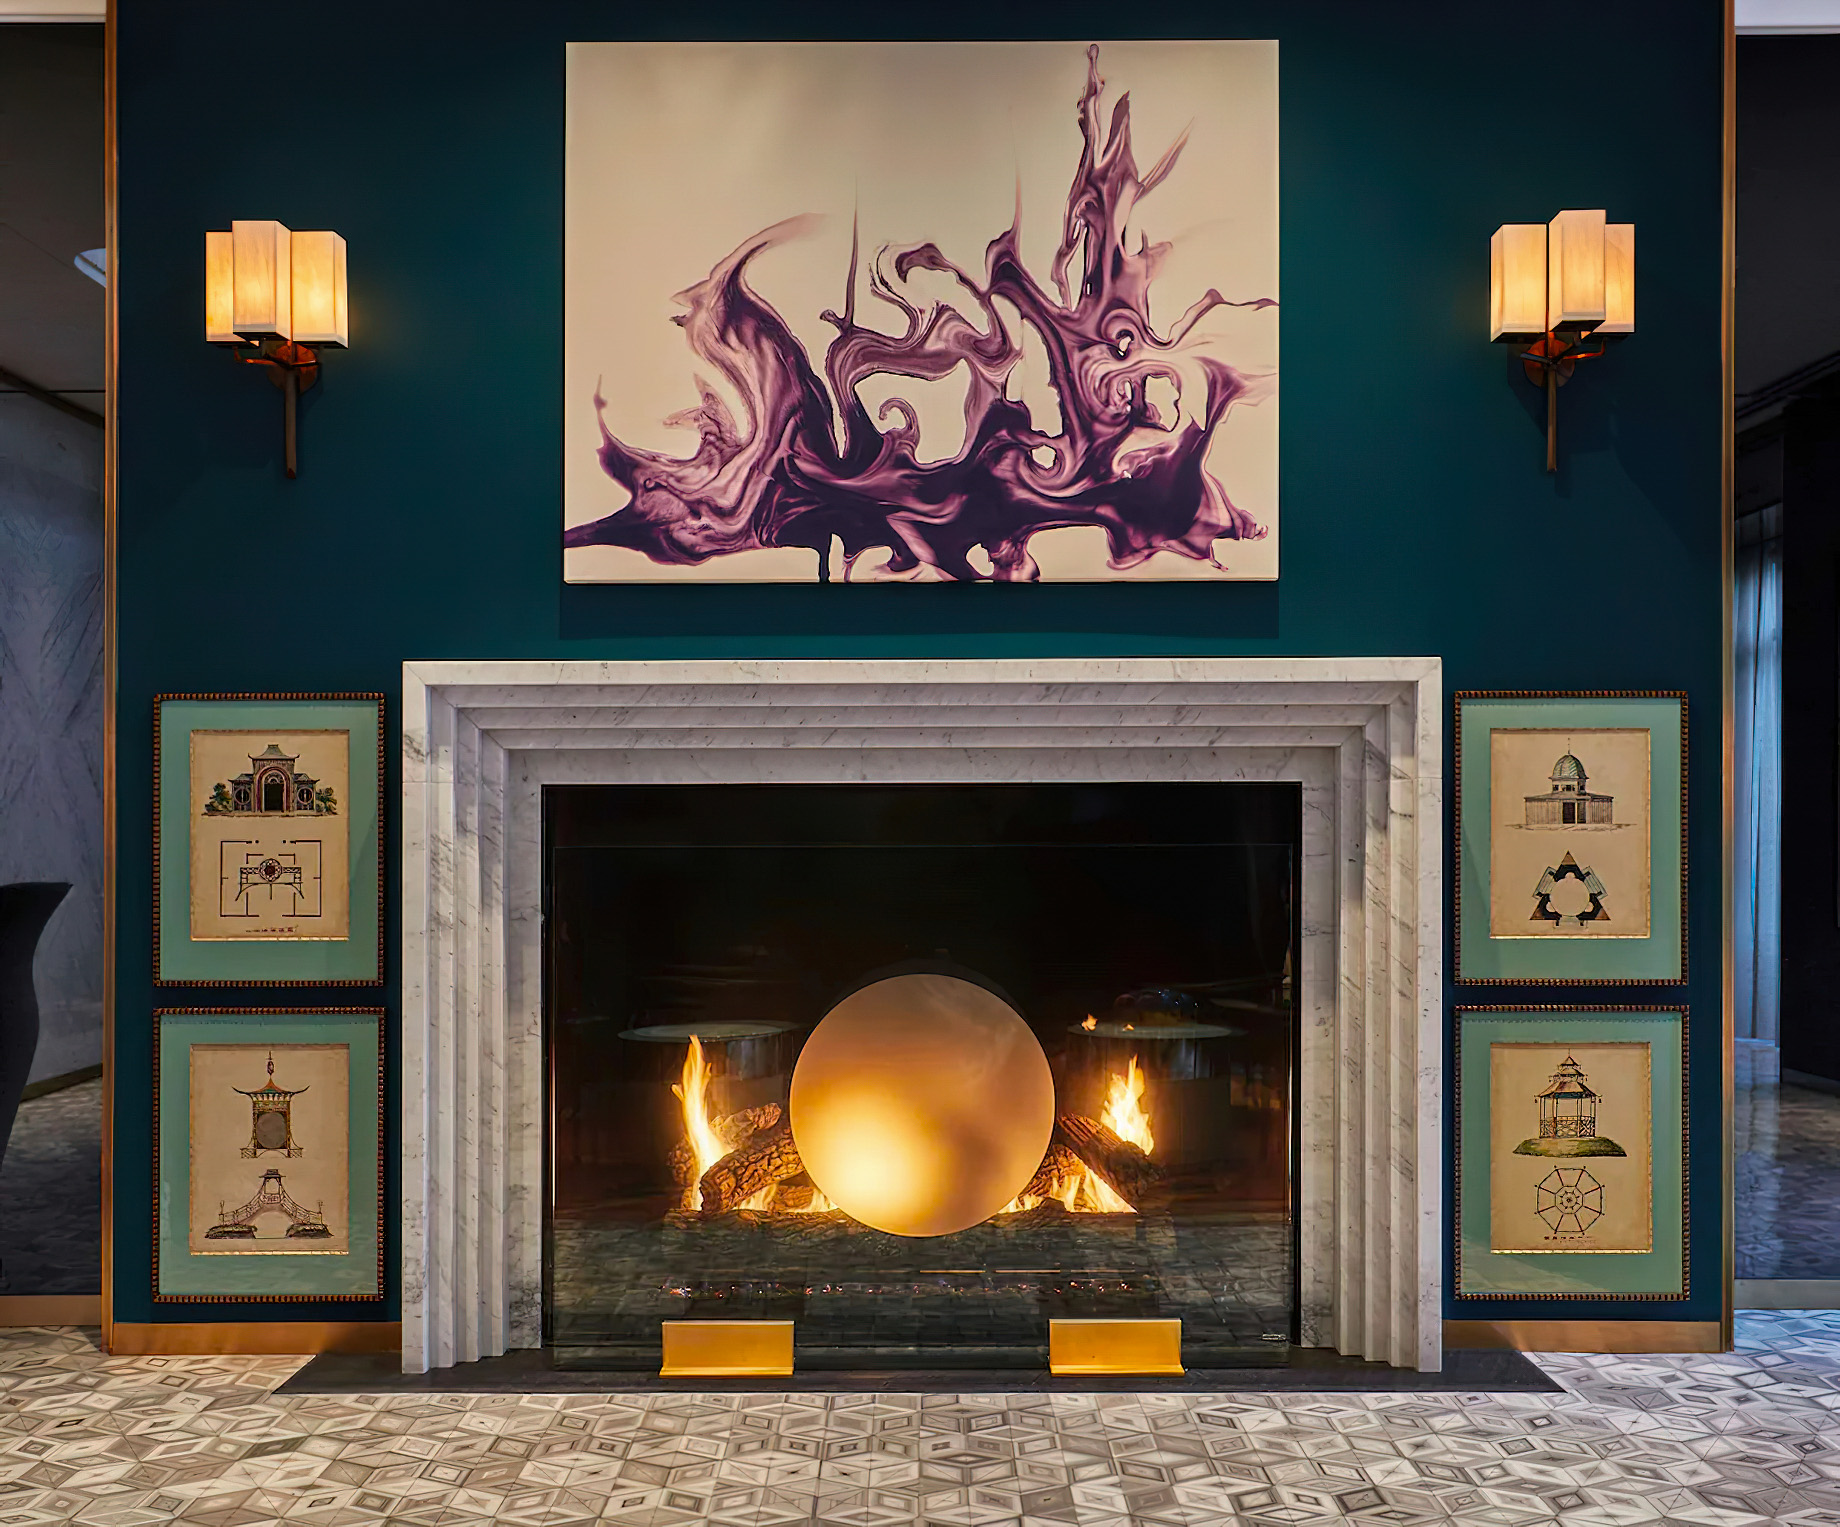 Viceroy Chicago Hotel – Chicago, IL, USA – Lobby Fireplace